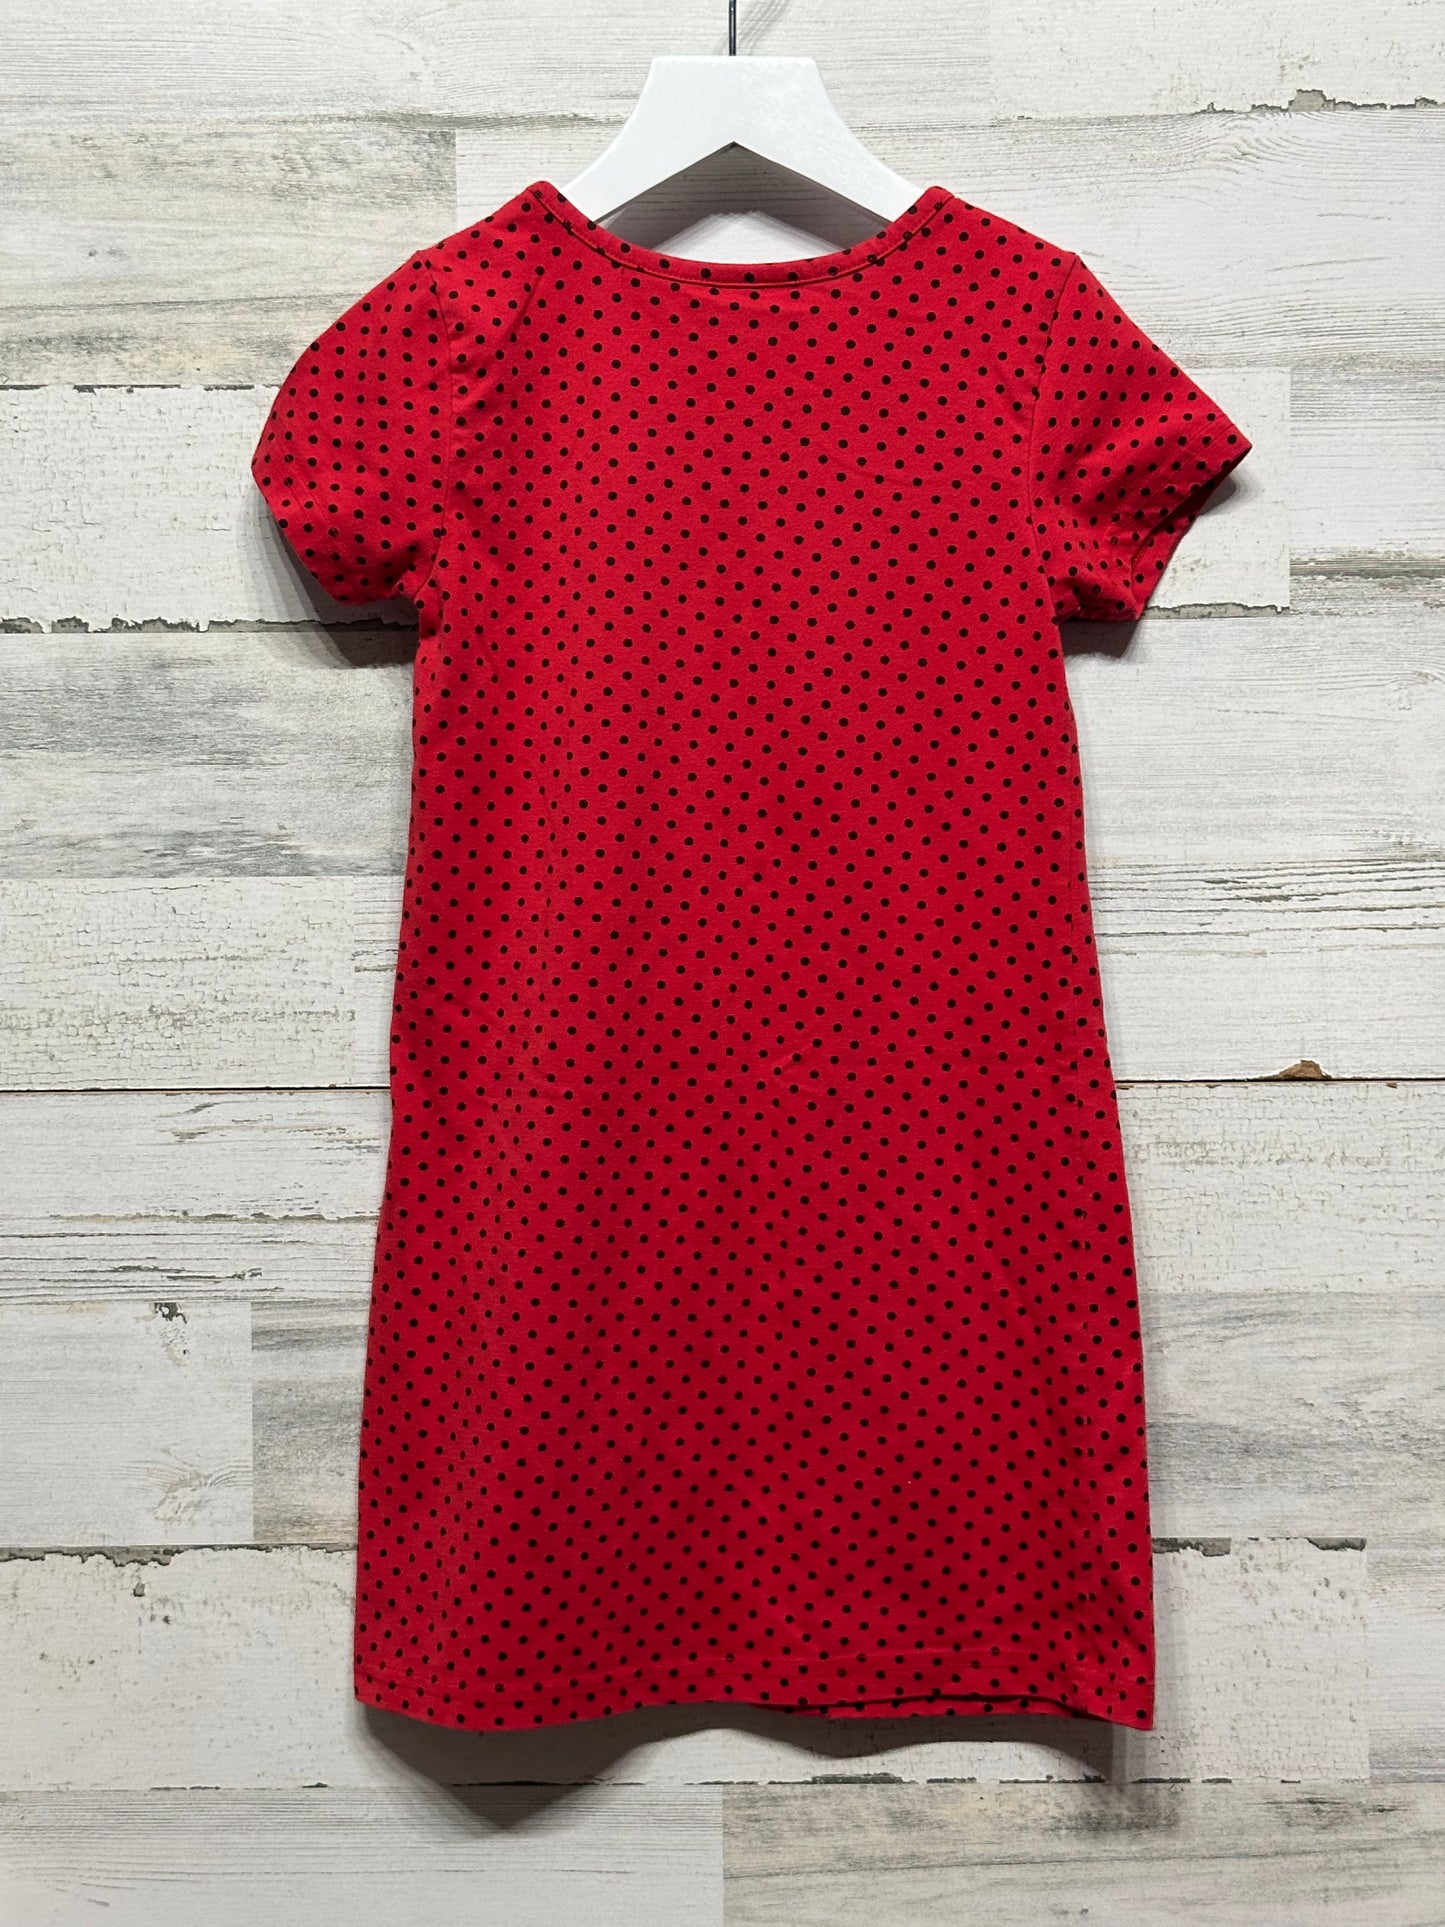 Girls Size 6x Specialty Girl Ladybug Dress - Good Used Condition